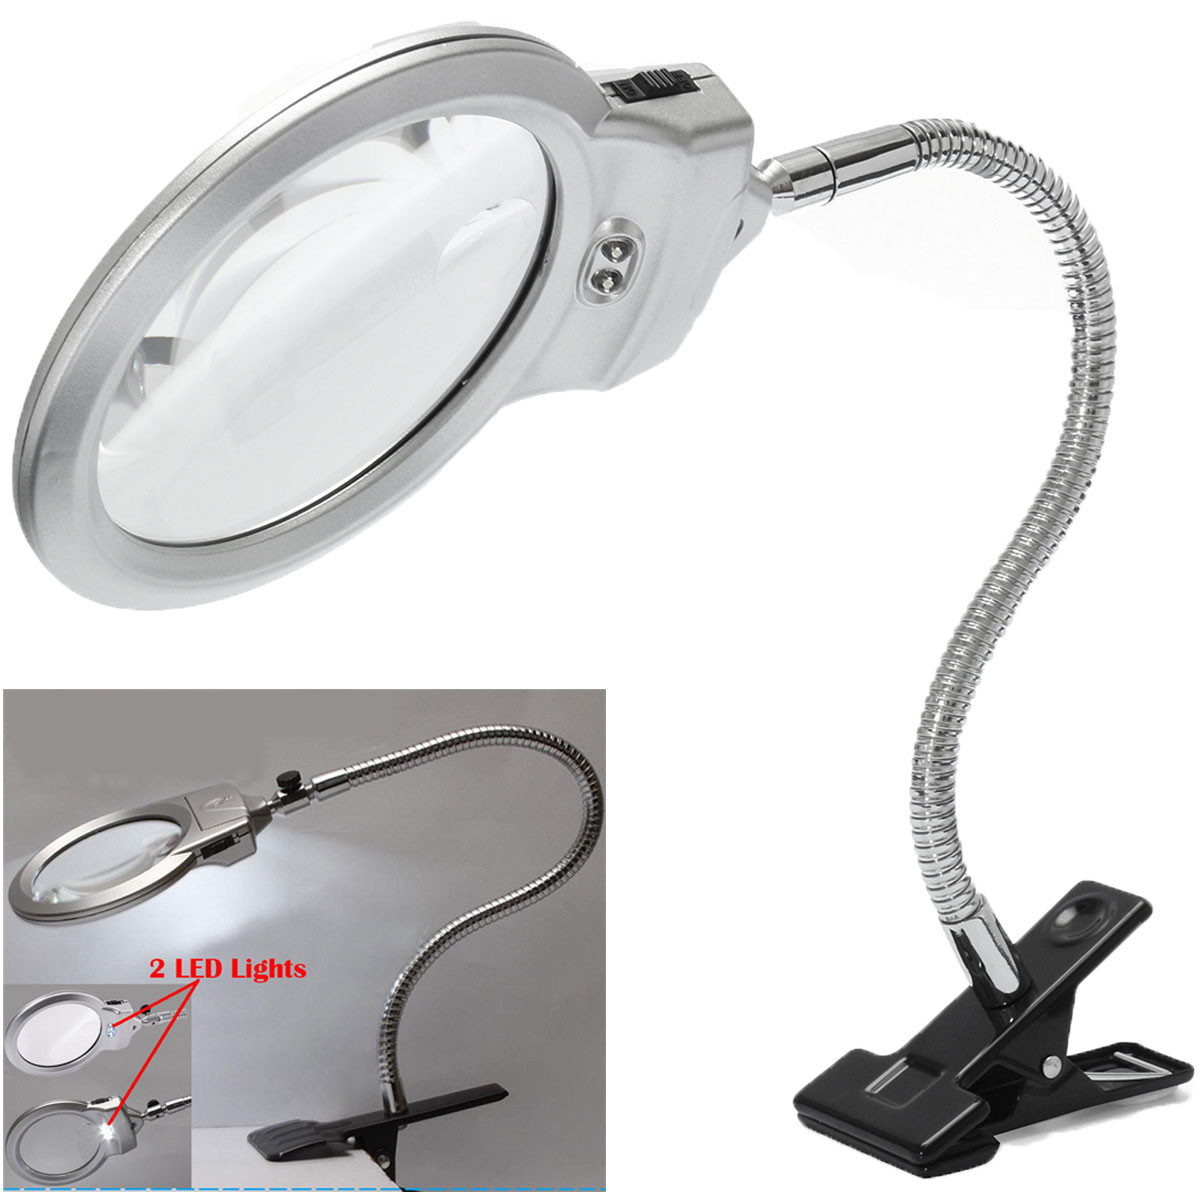 New-25-x-90MM-5-x-22MM-2-LED-Lighted-Table-Top-Desk-Magnifier-Magnifying-Glass-with-Clamp-1075605-1